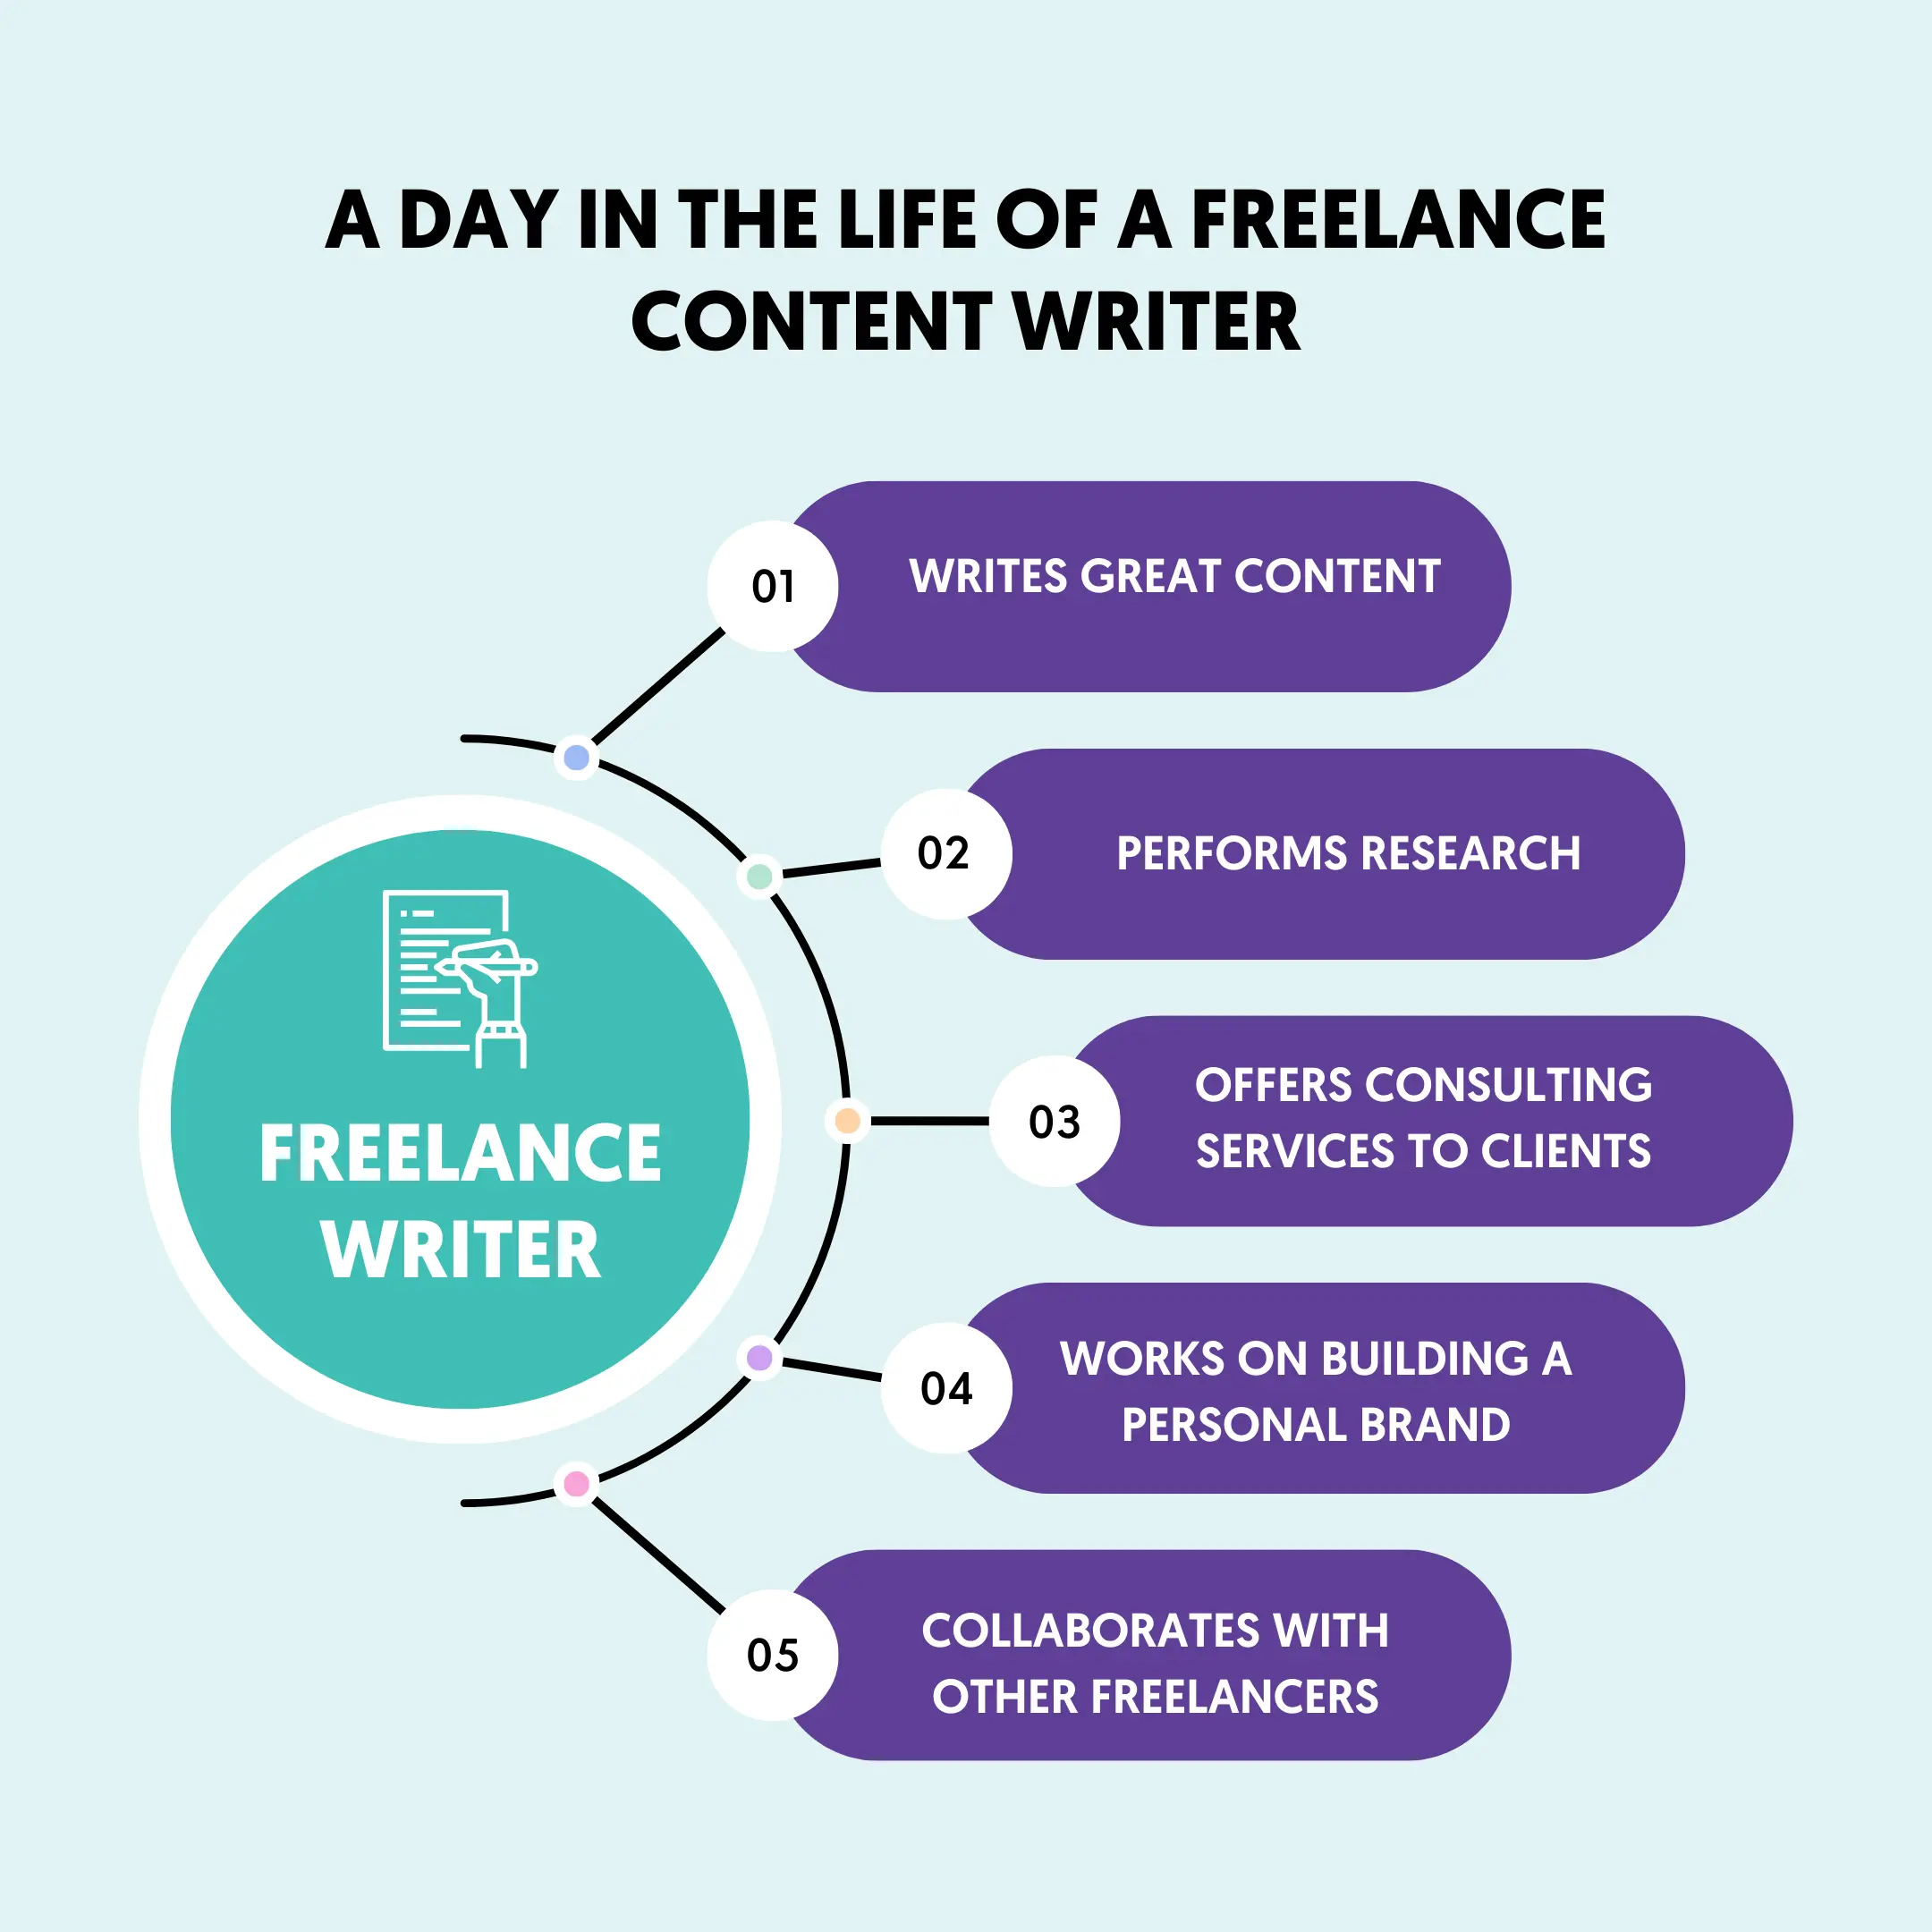 what education is required to be a freelance writer